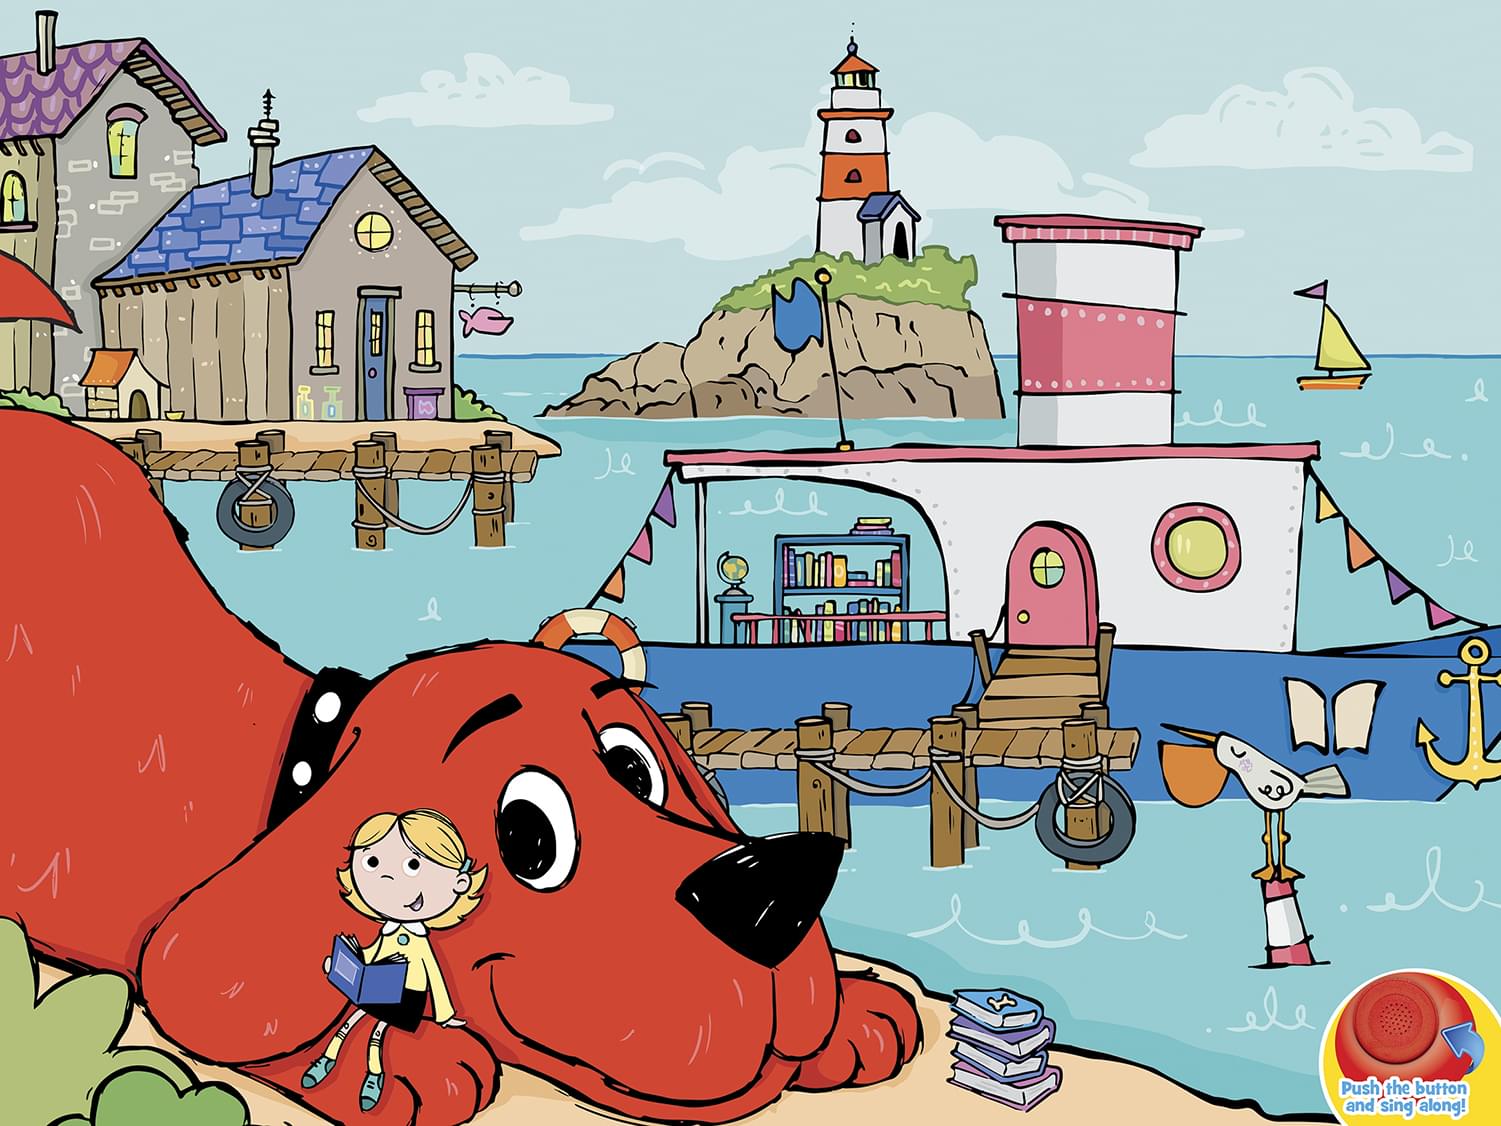 Clifford Library Boat 24 Piece Sing-A-Long Song Sound Puzzle